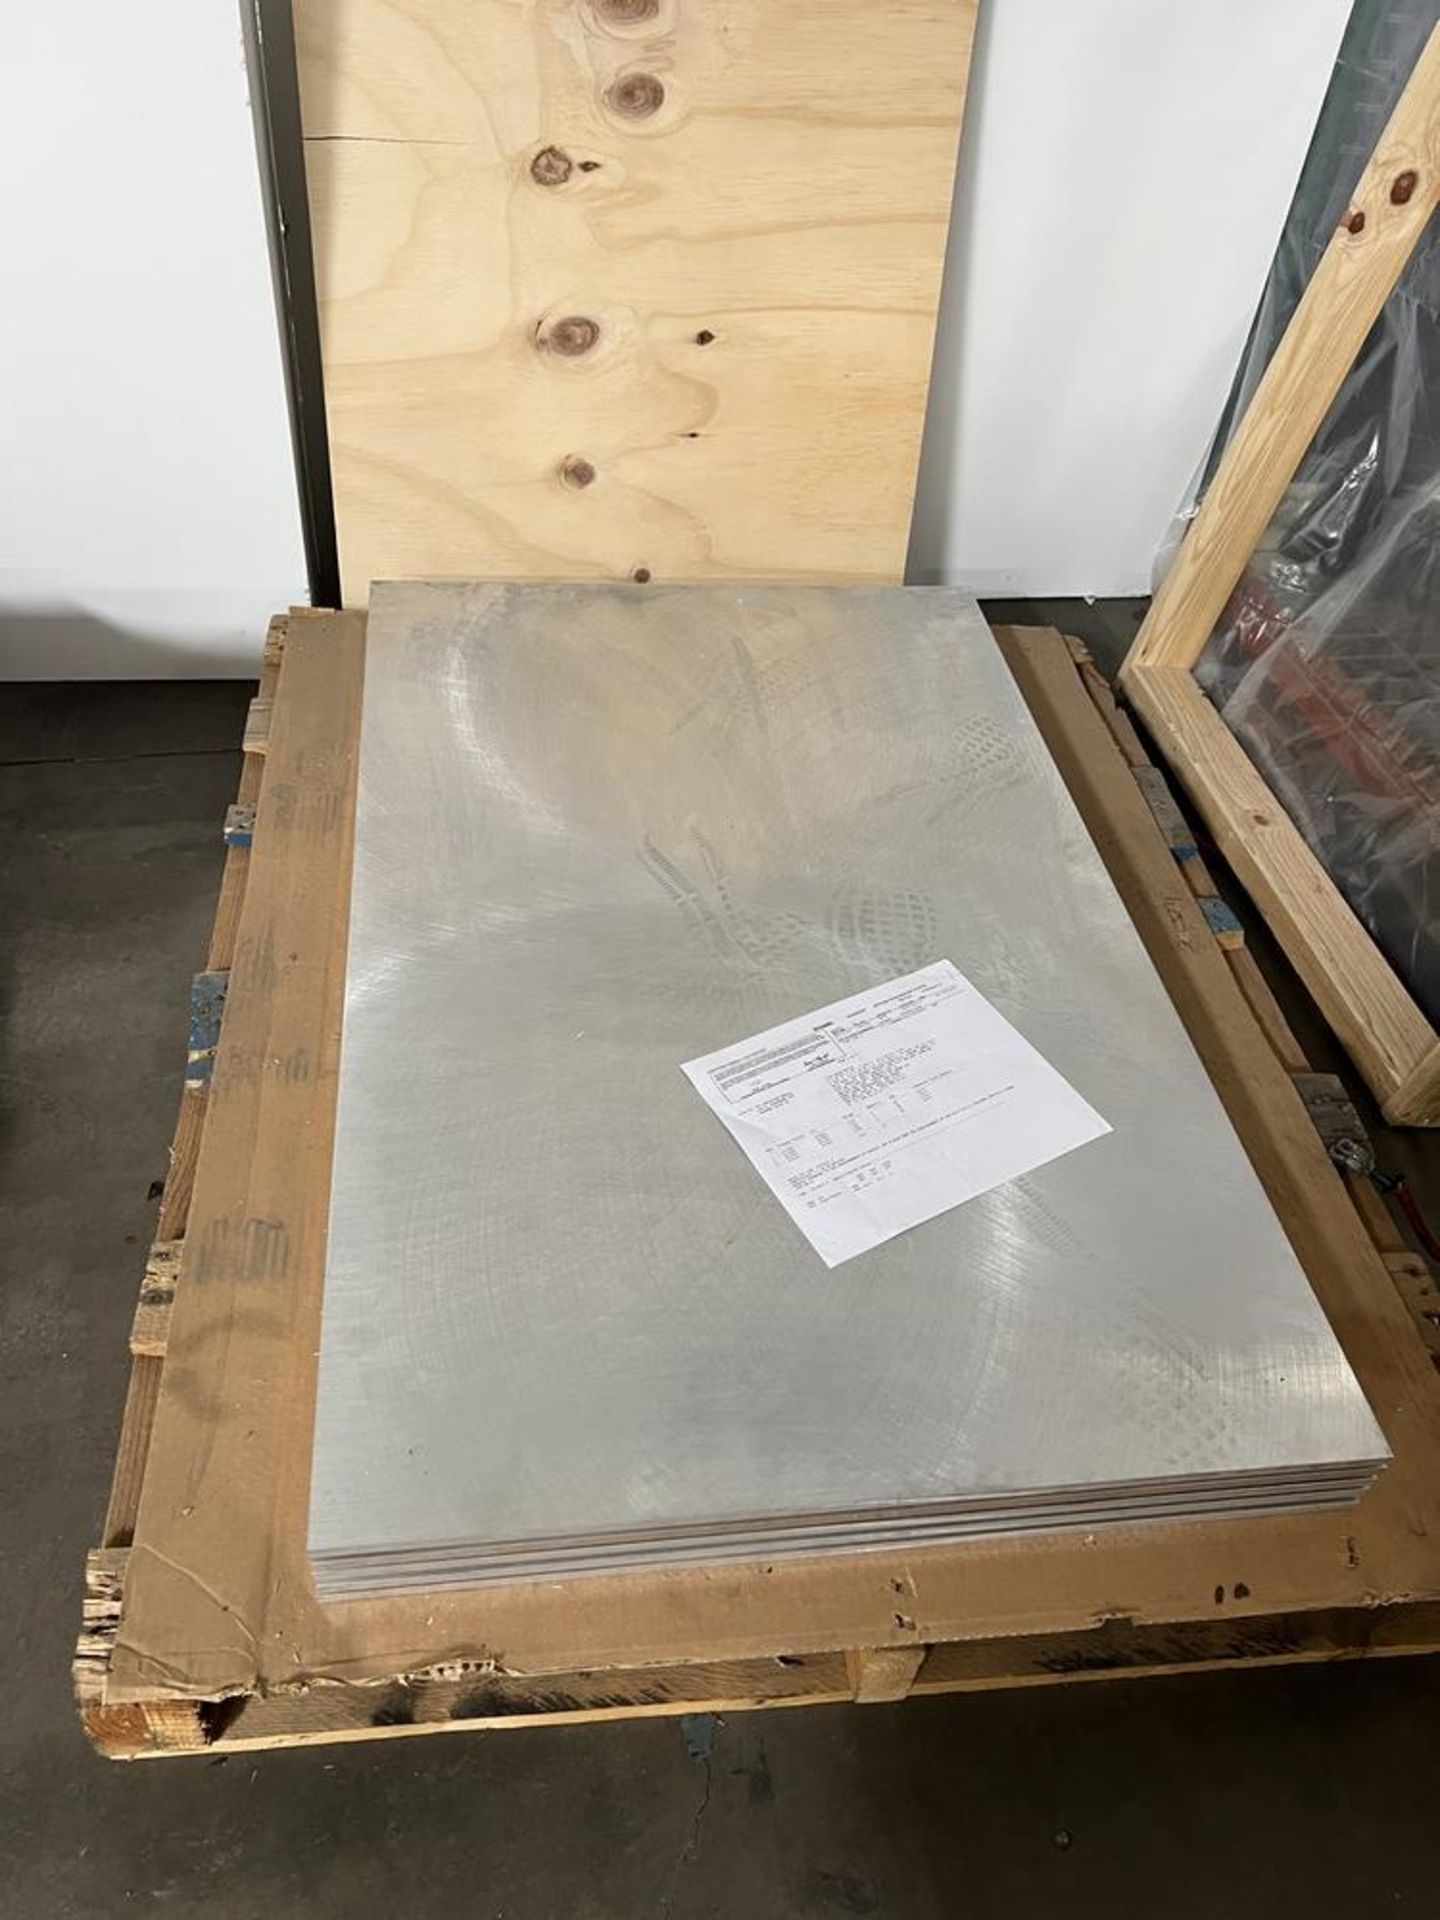 (5) Precision Ground Aluminum Plate 44" x 28" x 1/2" With Certified Inspection Report - Bild 4 aus 4